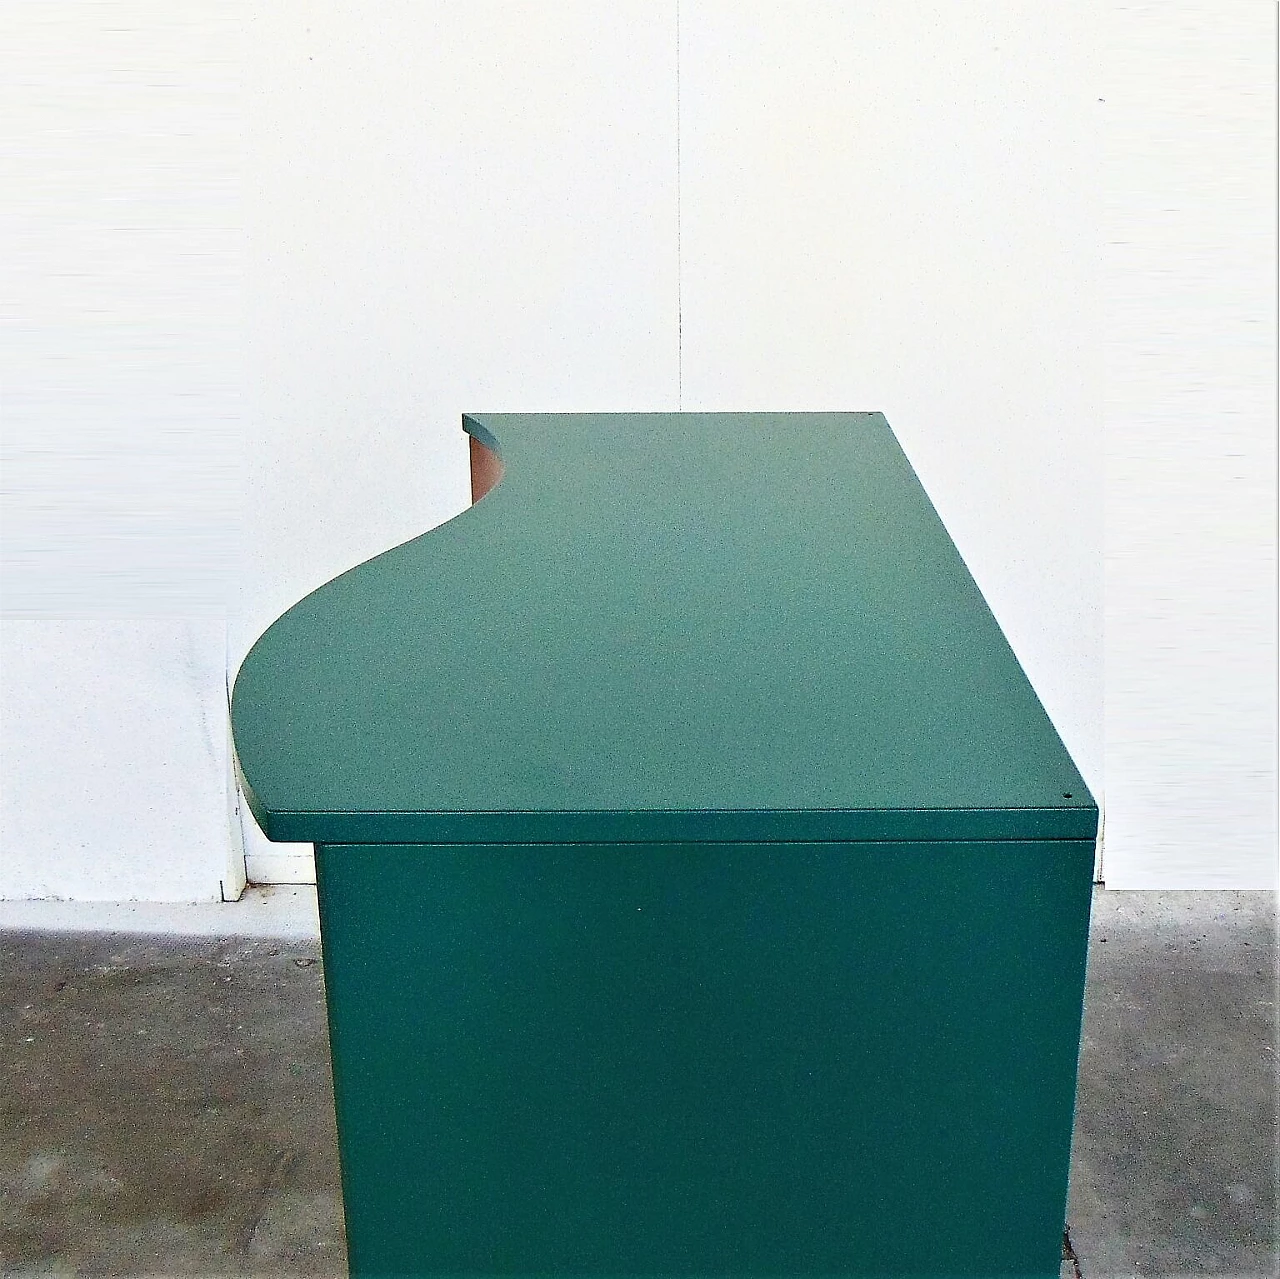 Sideboard Green Satin Lacquer, Doors in Walnut-Stained Cherry, for Roche Bobois, 1990s 1167299